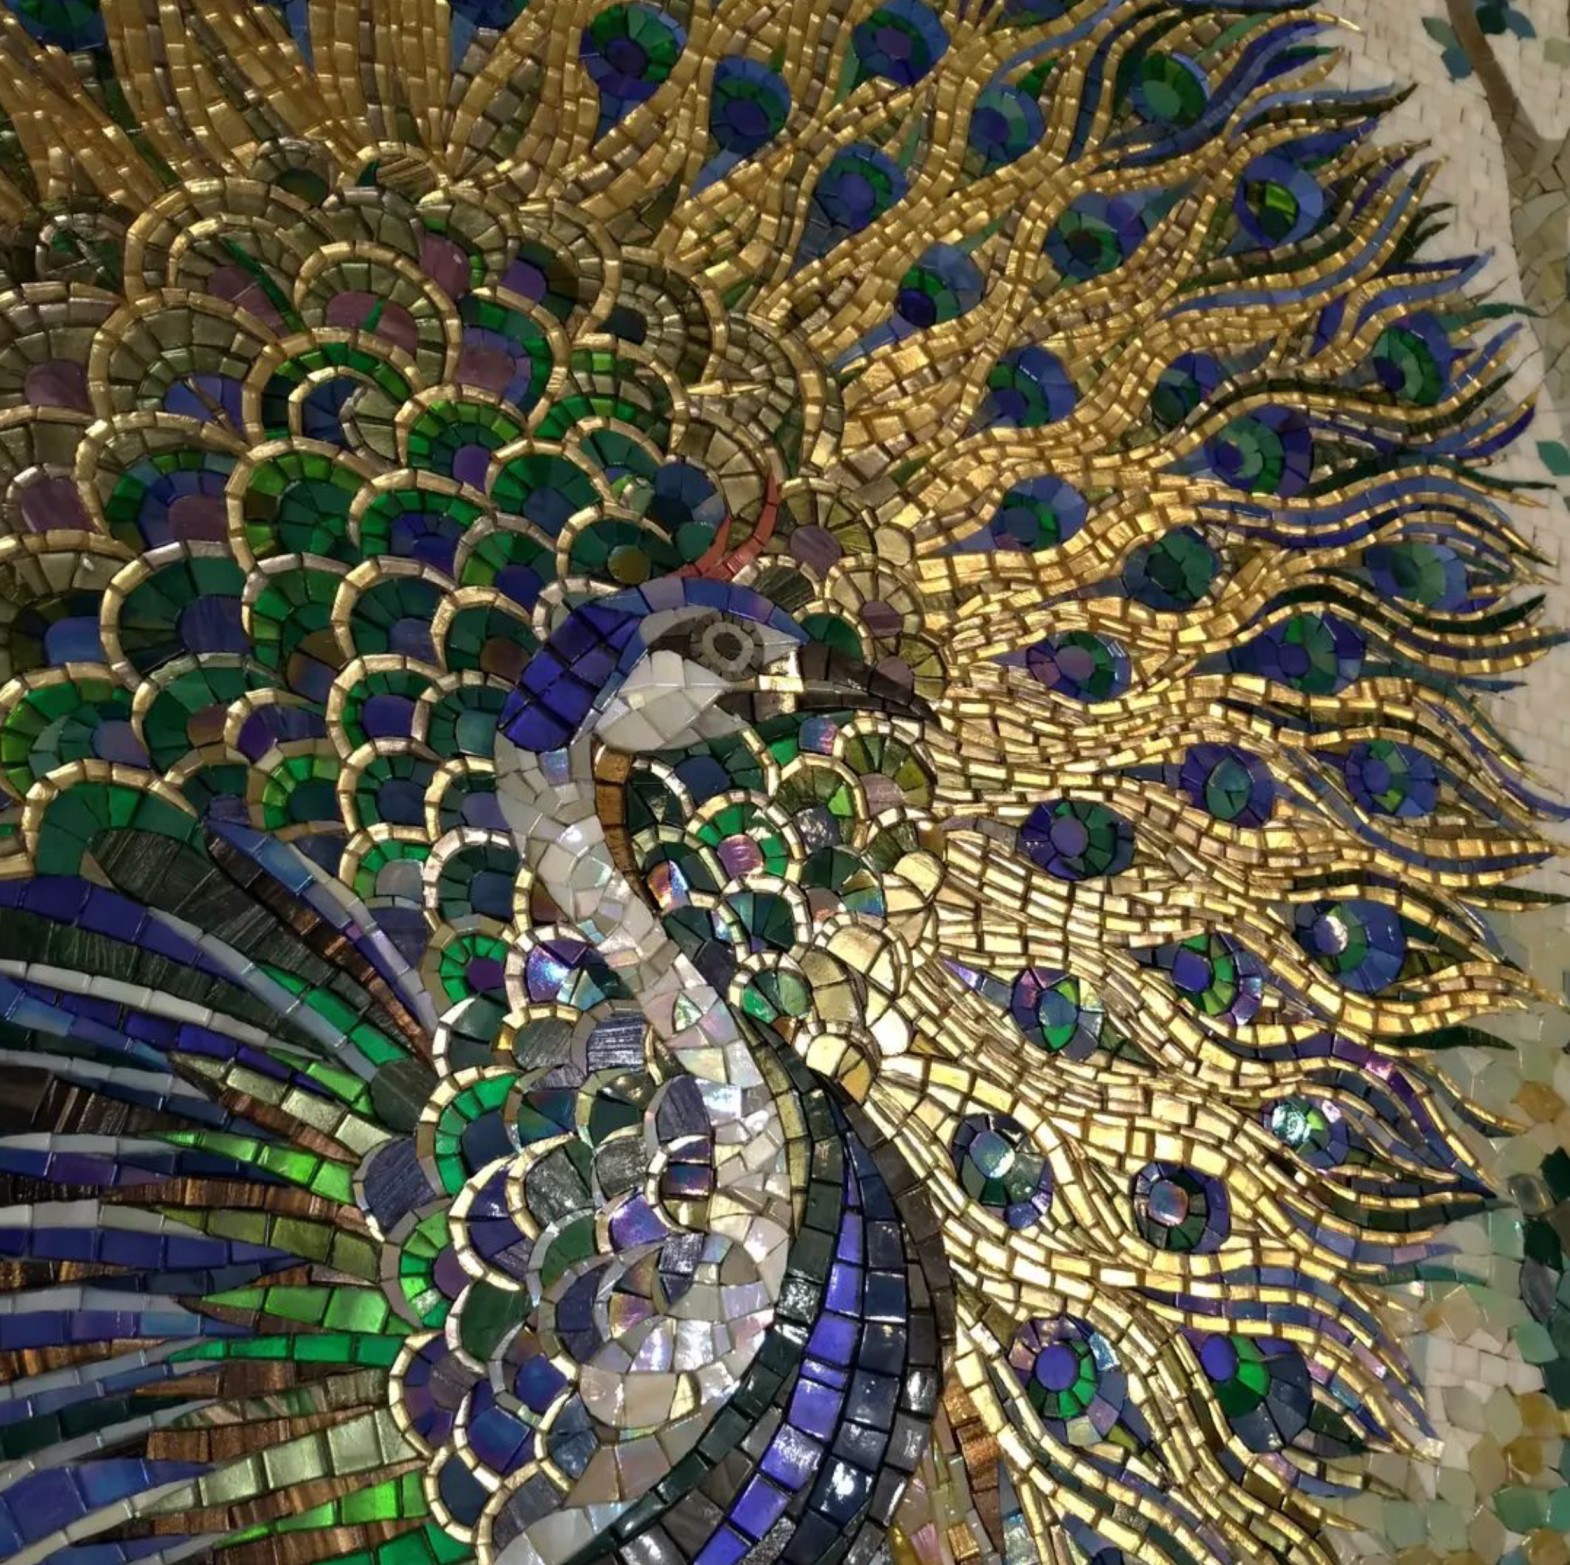 
A colorful mosaic artwork depicting a detailed and vibrant peacock with its feathers fanned out, made from various shades of green, blue, gold, and purple tiles.